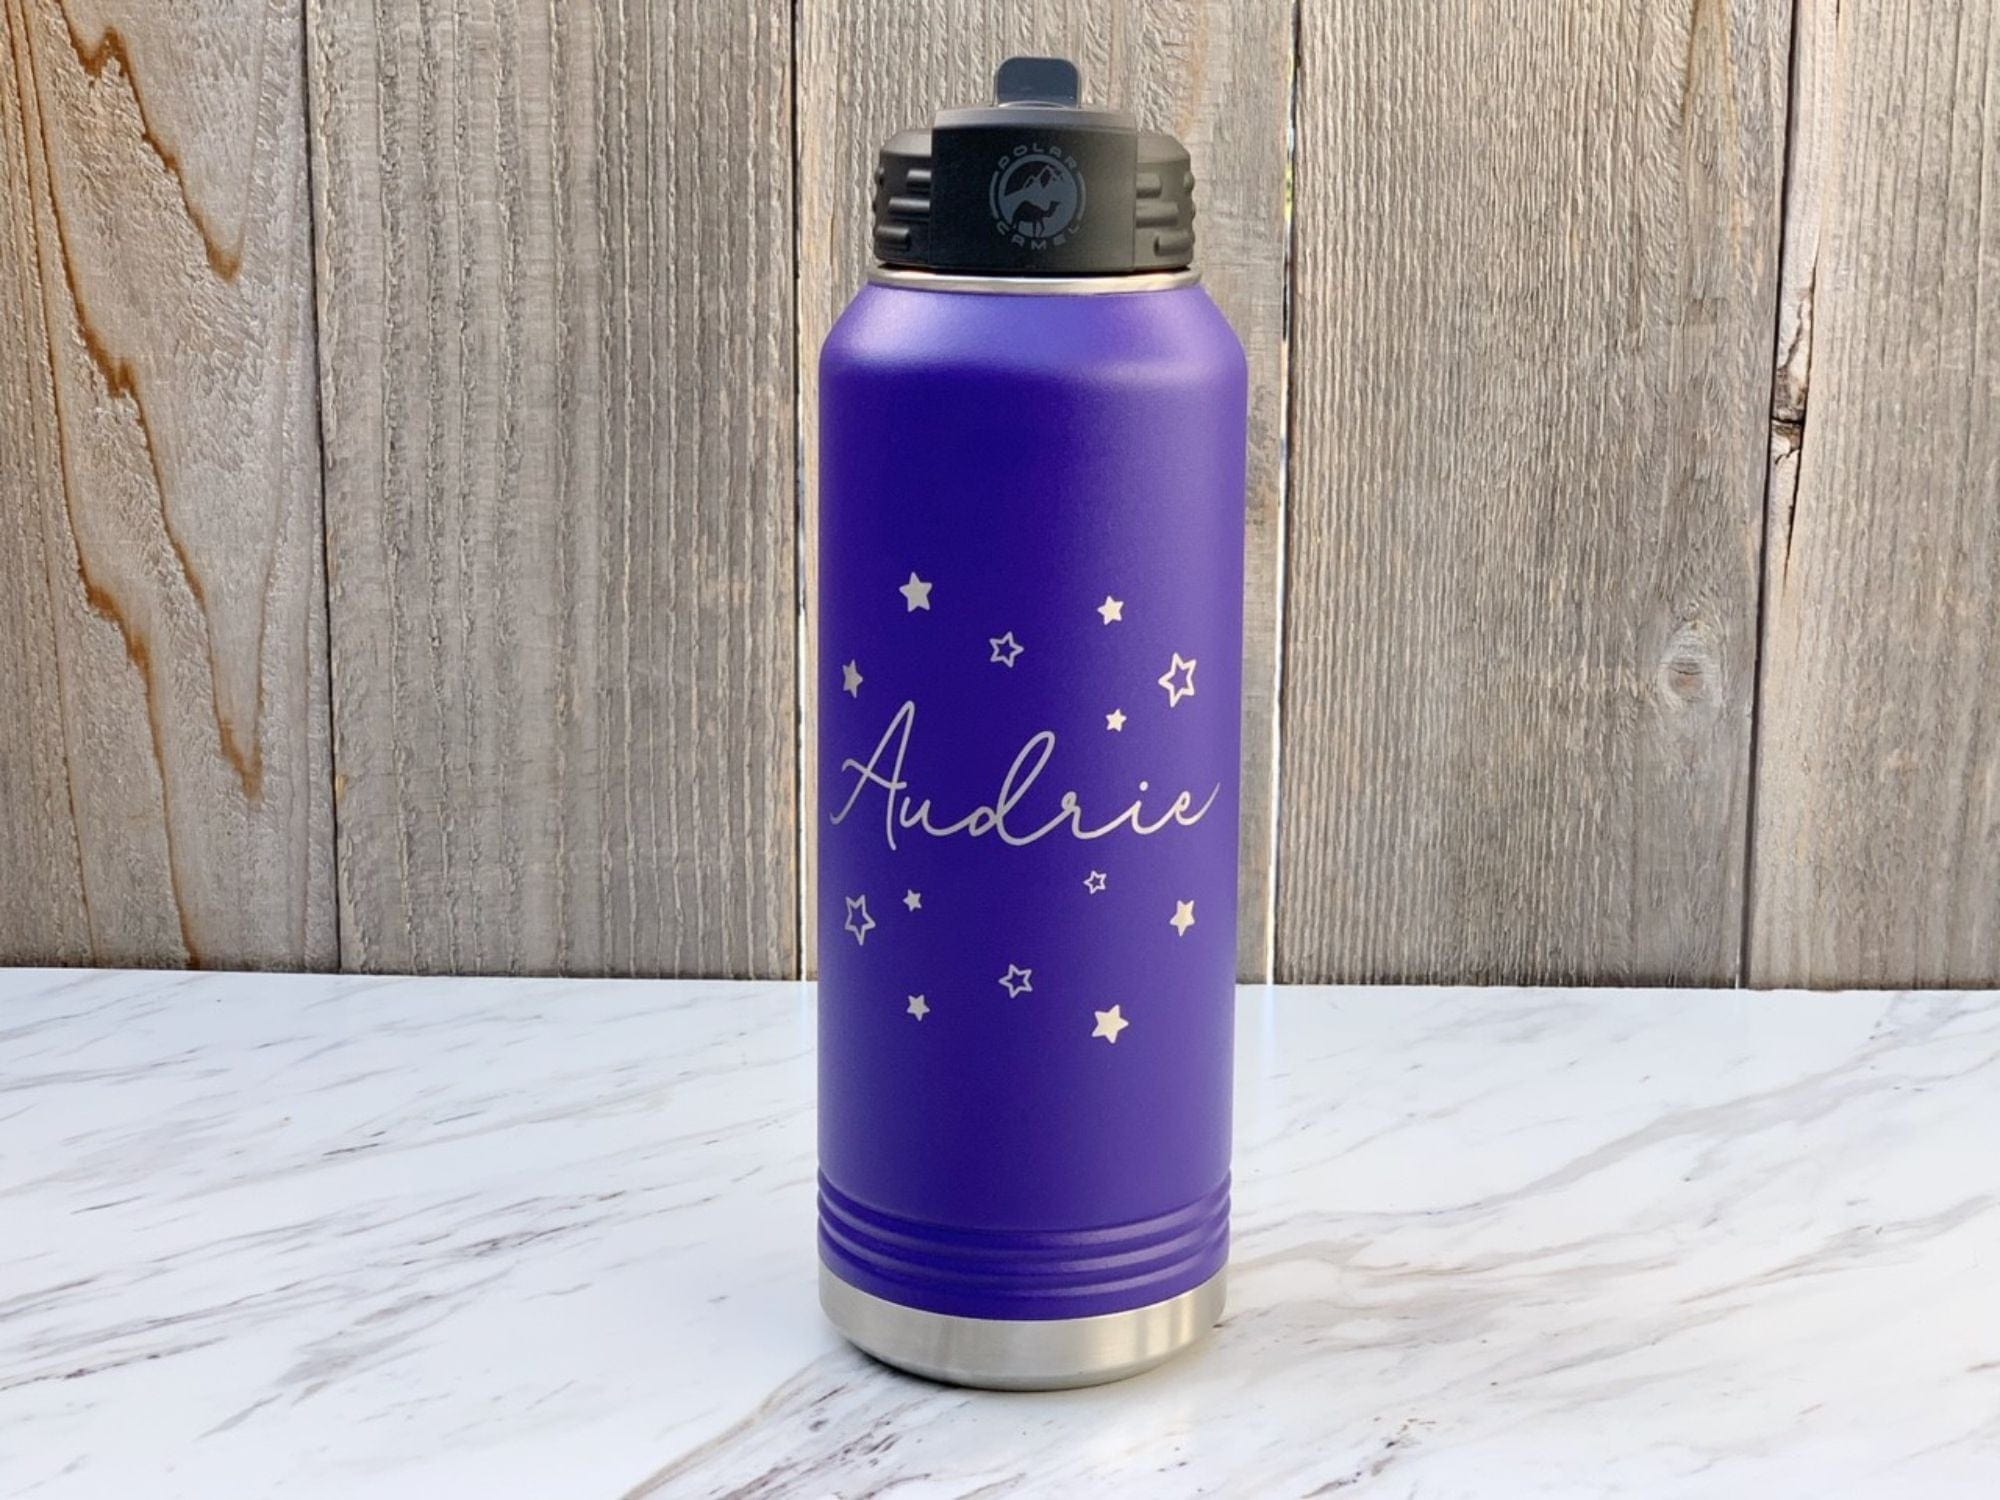 https://cdn.shopify.com/s/files/1/0777/8633/products/engraving-32-oz-name-engraved-water-bottle-with-stars-personalized-with-name-29702891077799.jpg?v=1681038022